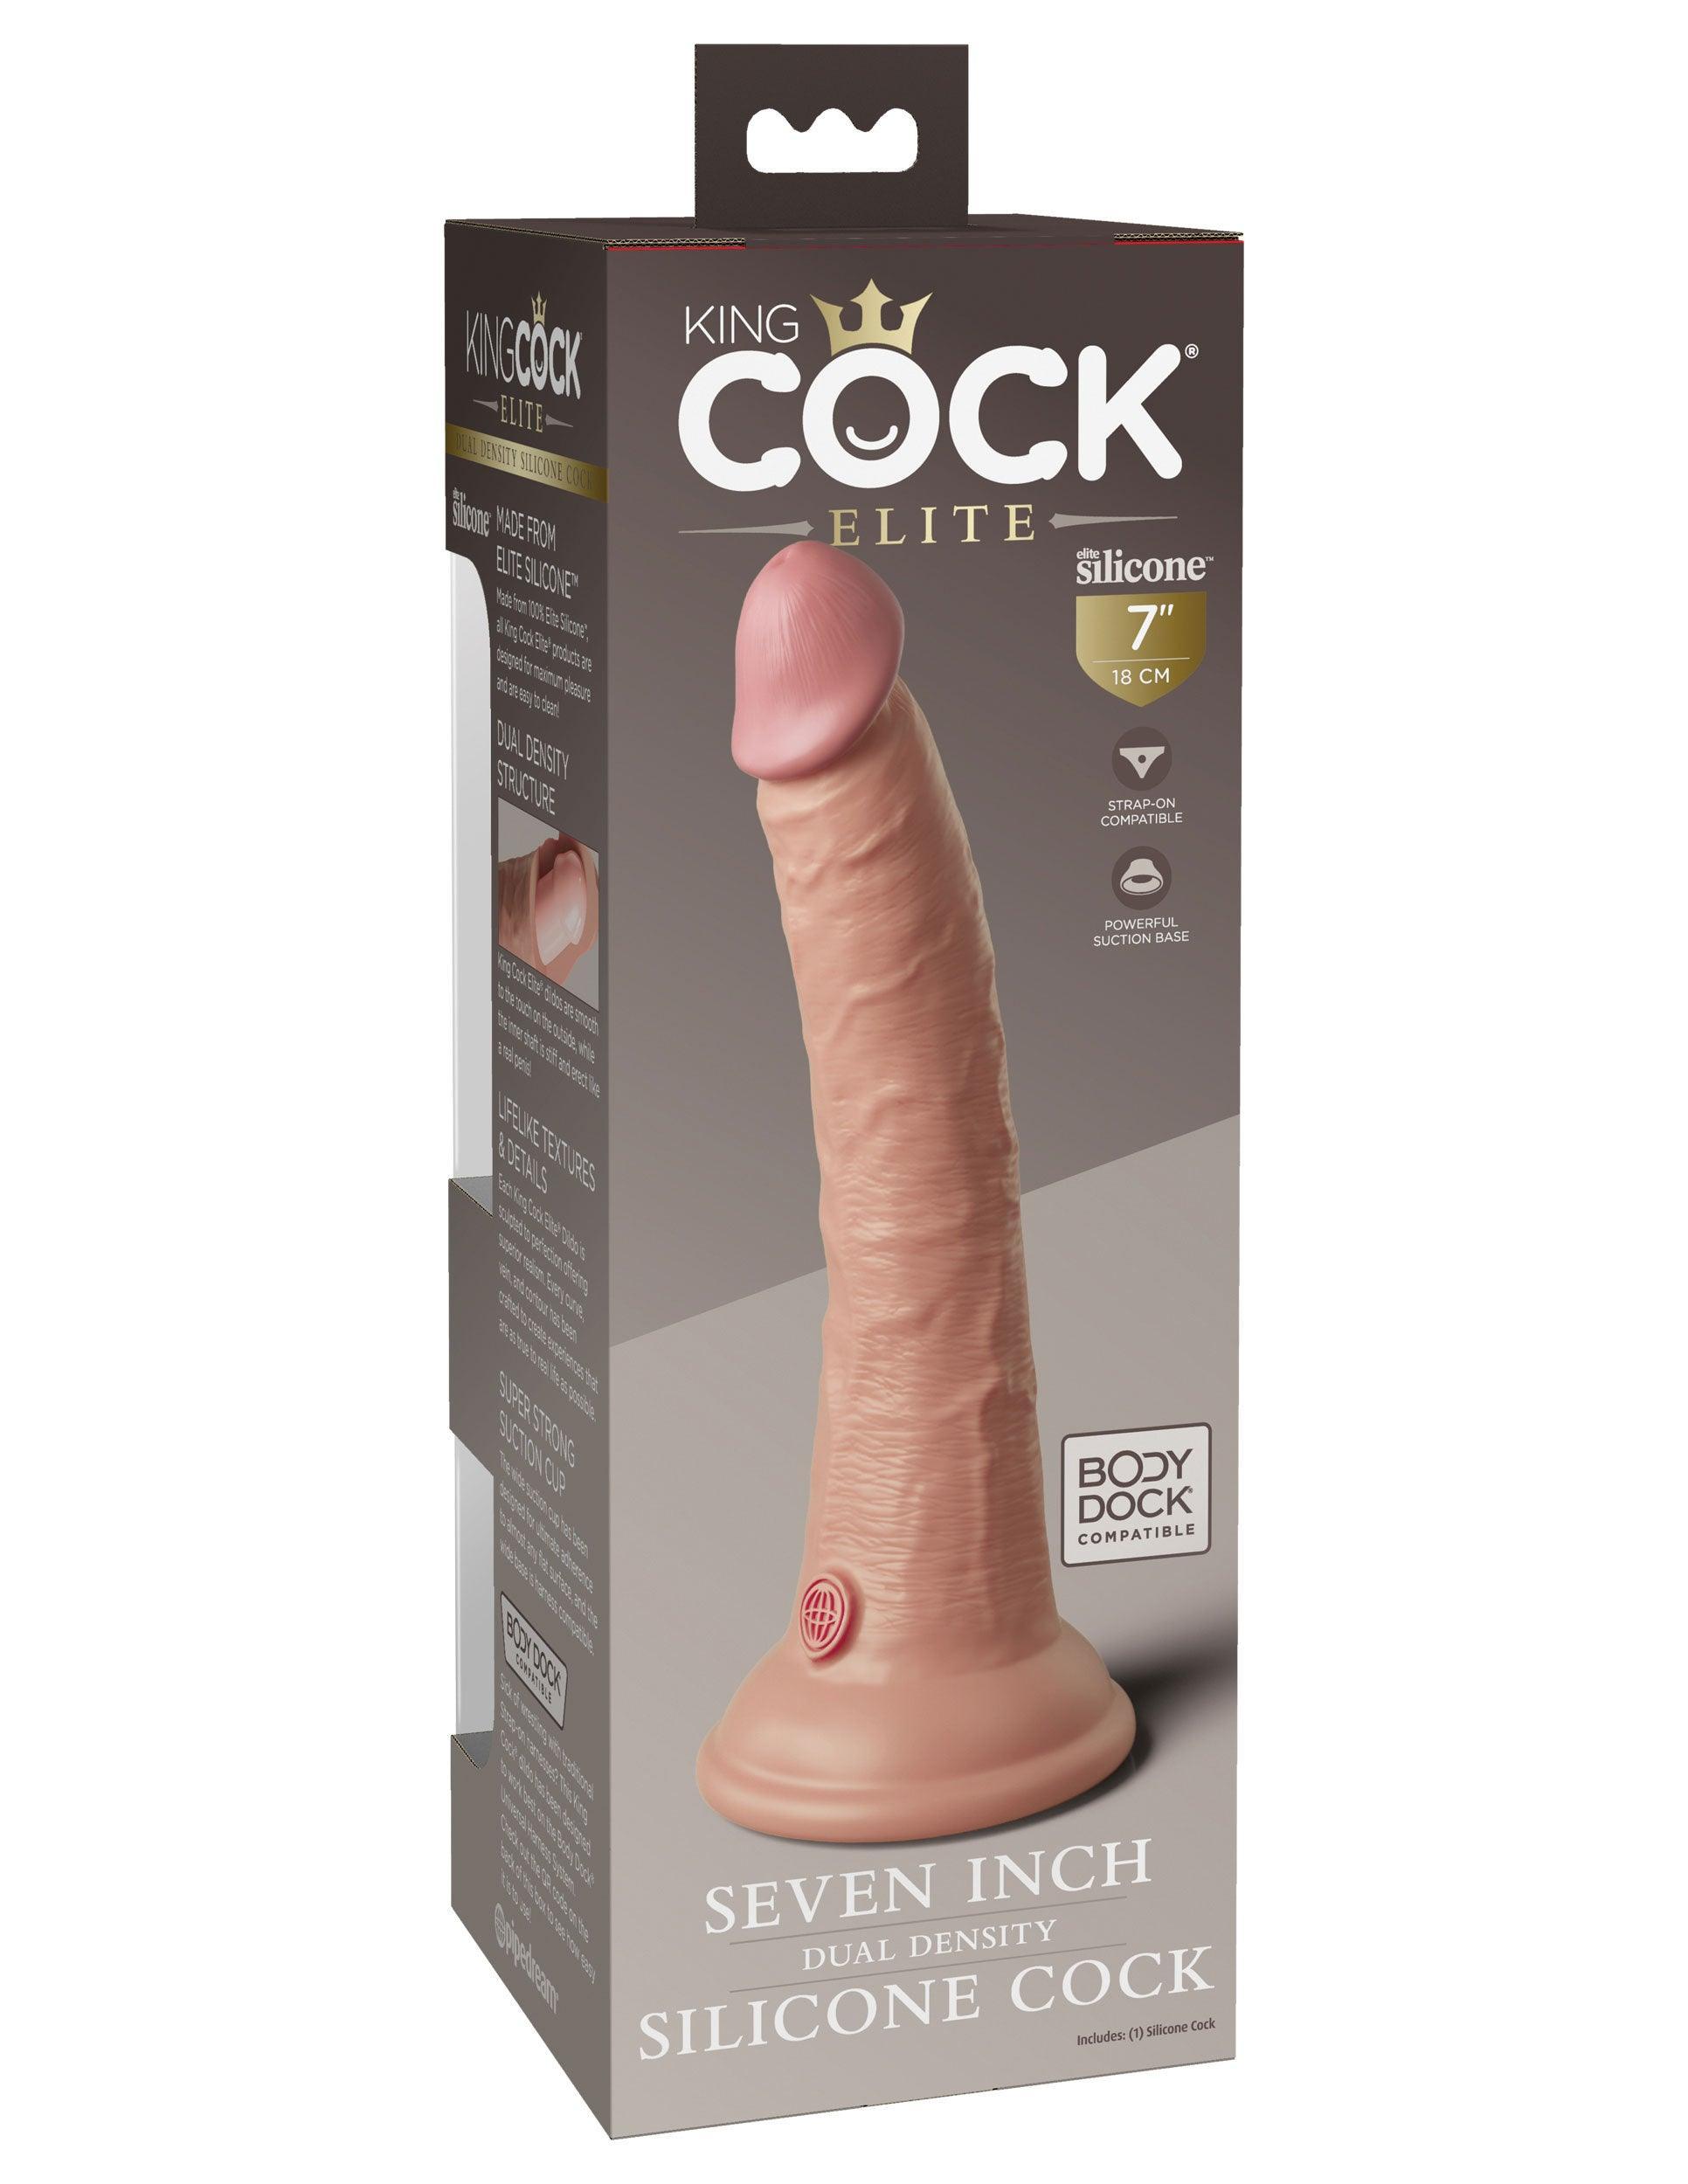 King Cock Elite 7 Inch Silicone Dual Density Cock - Light - My Sex Toy Hub